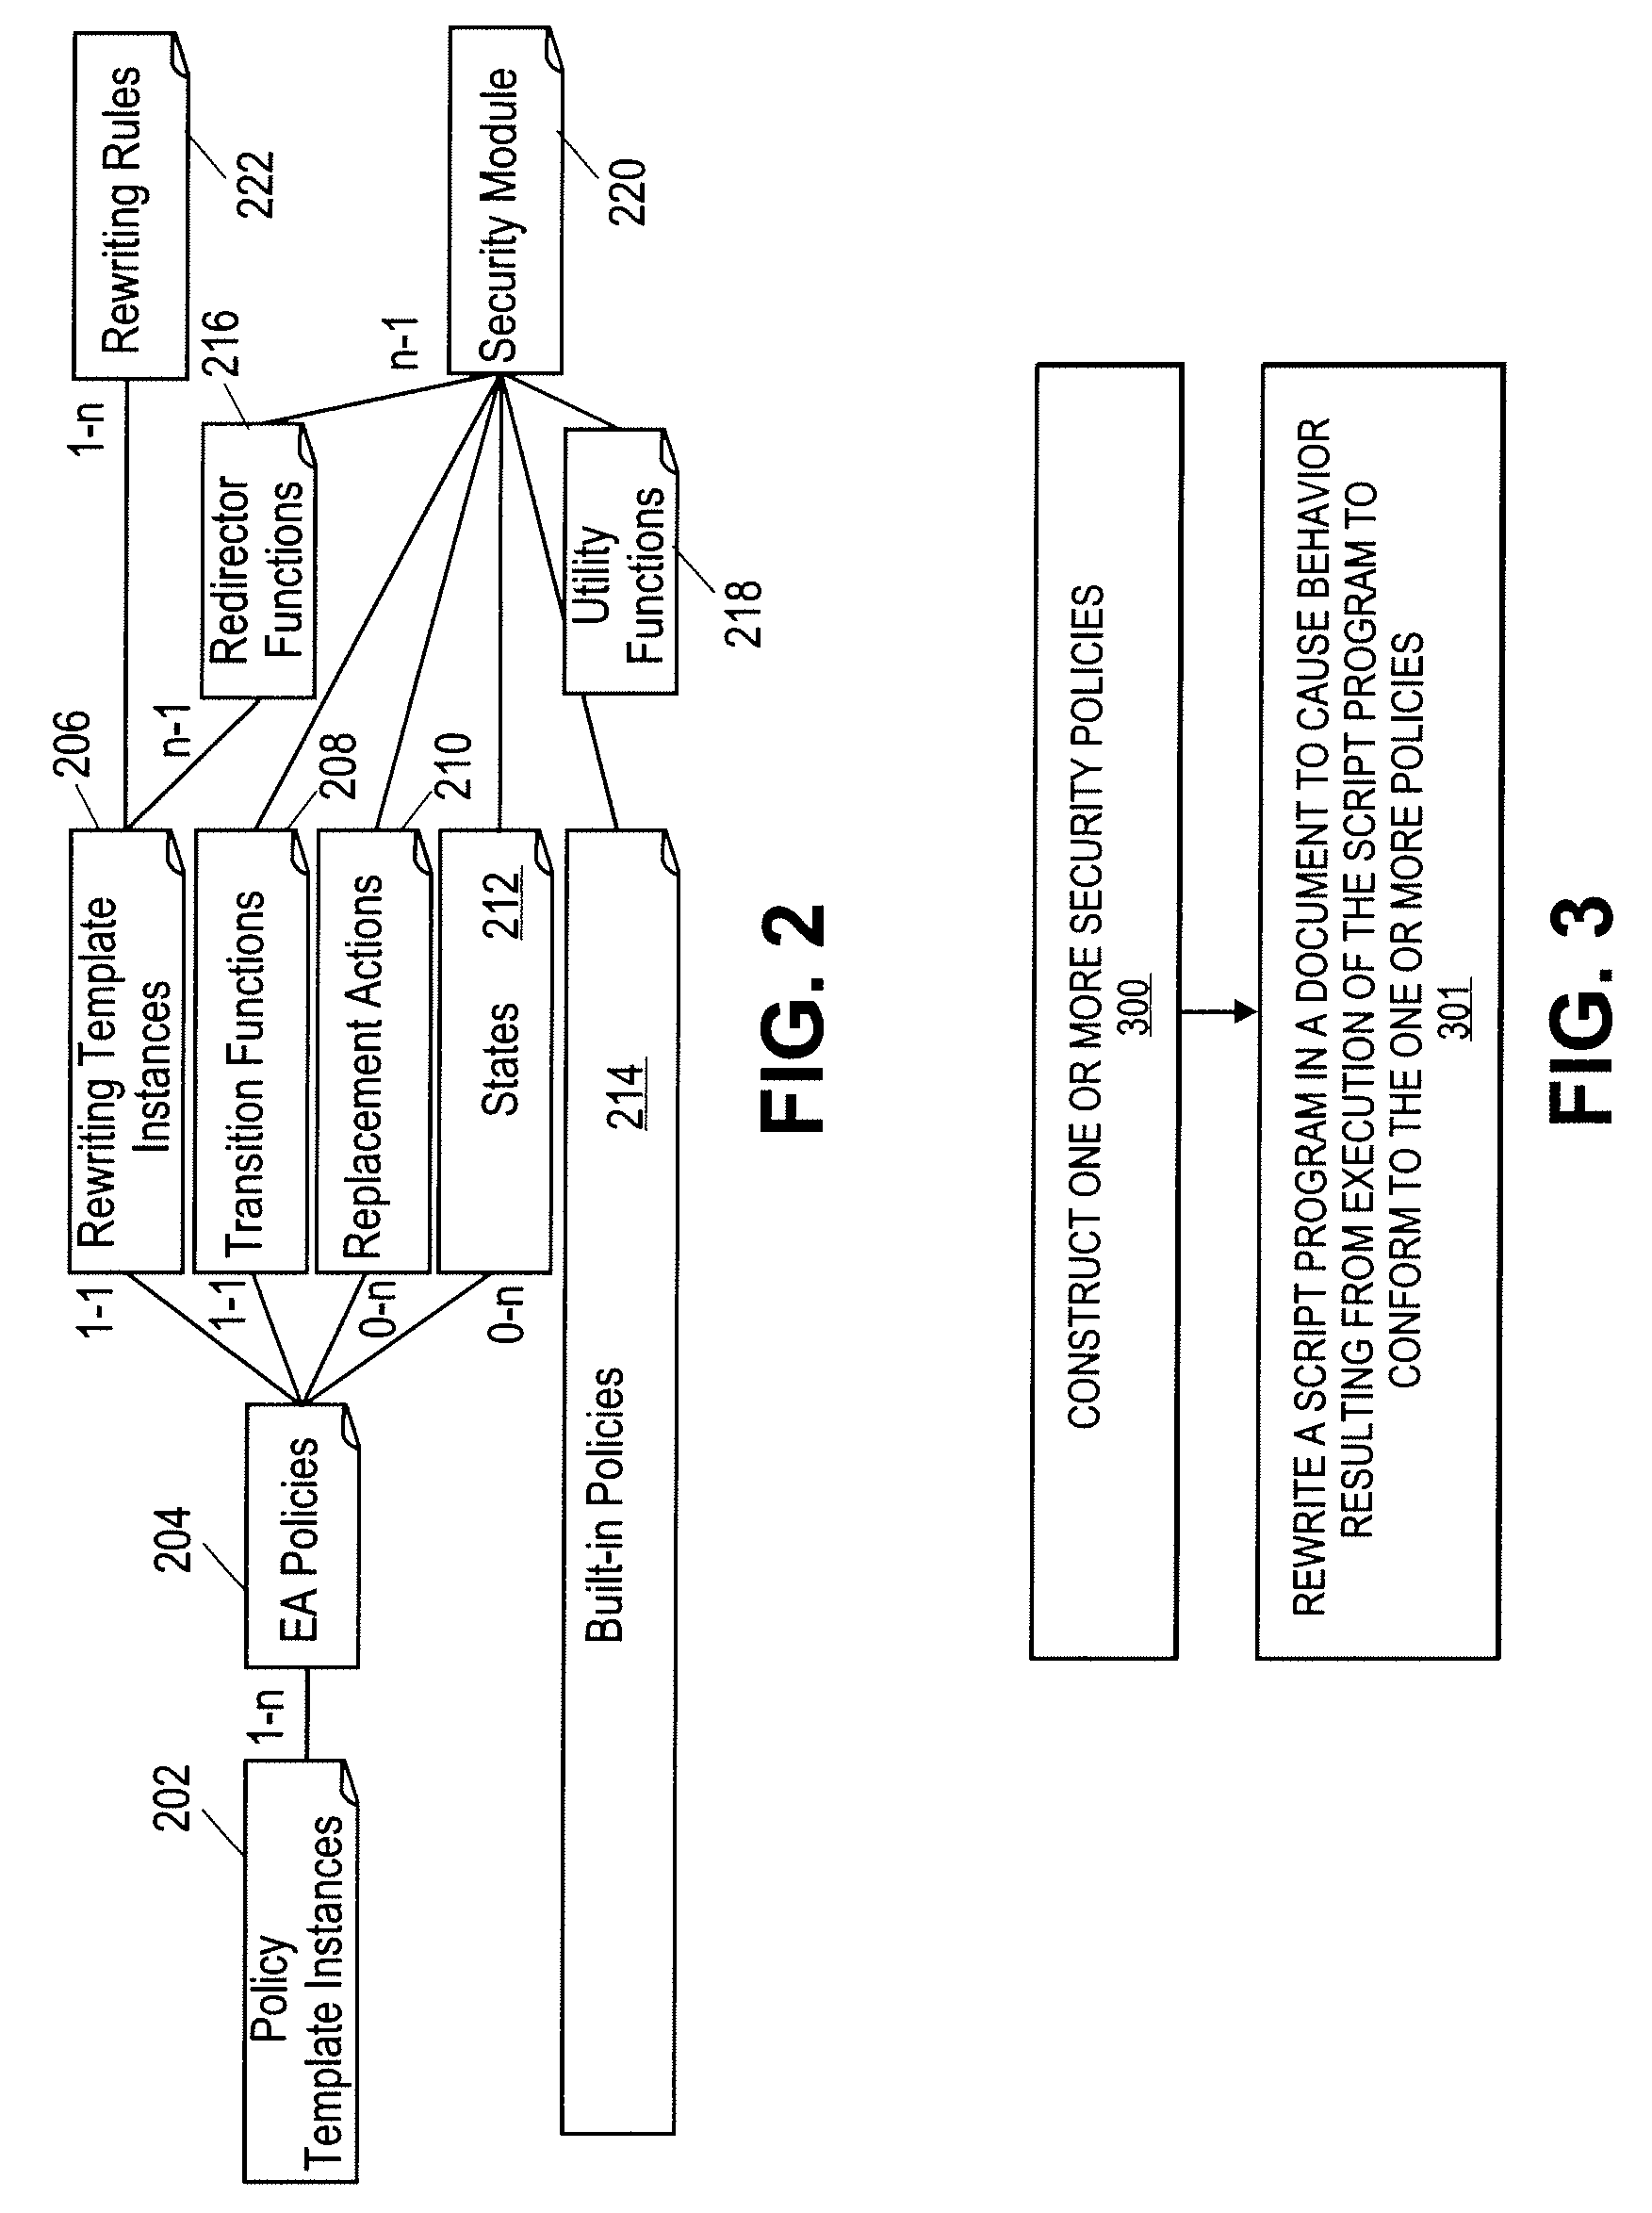 Method and apparatus for constructing security policies for web content instrumentation against browser-based attacks